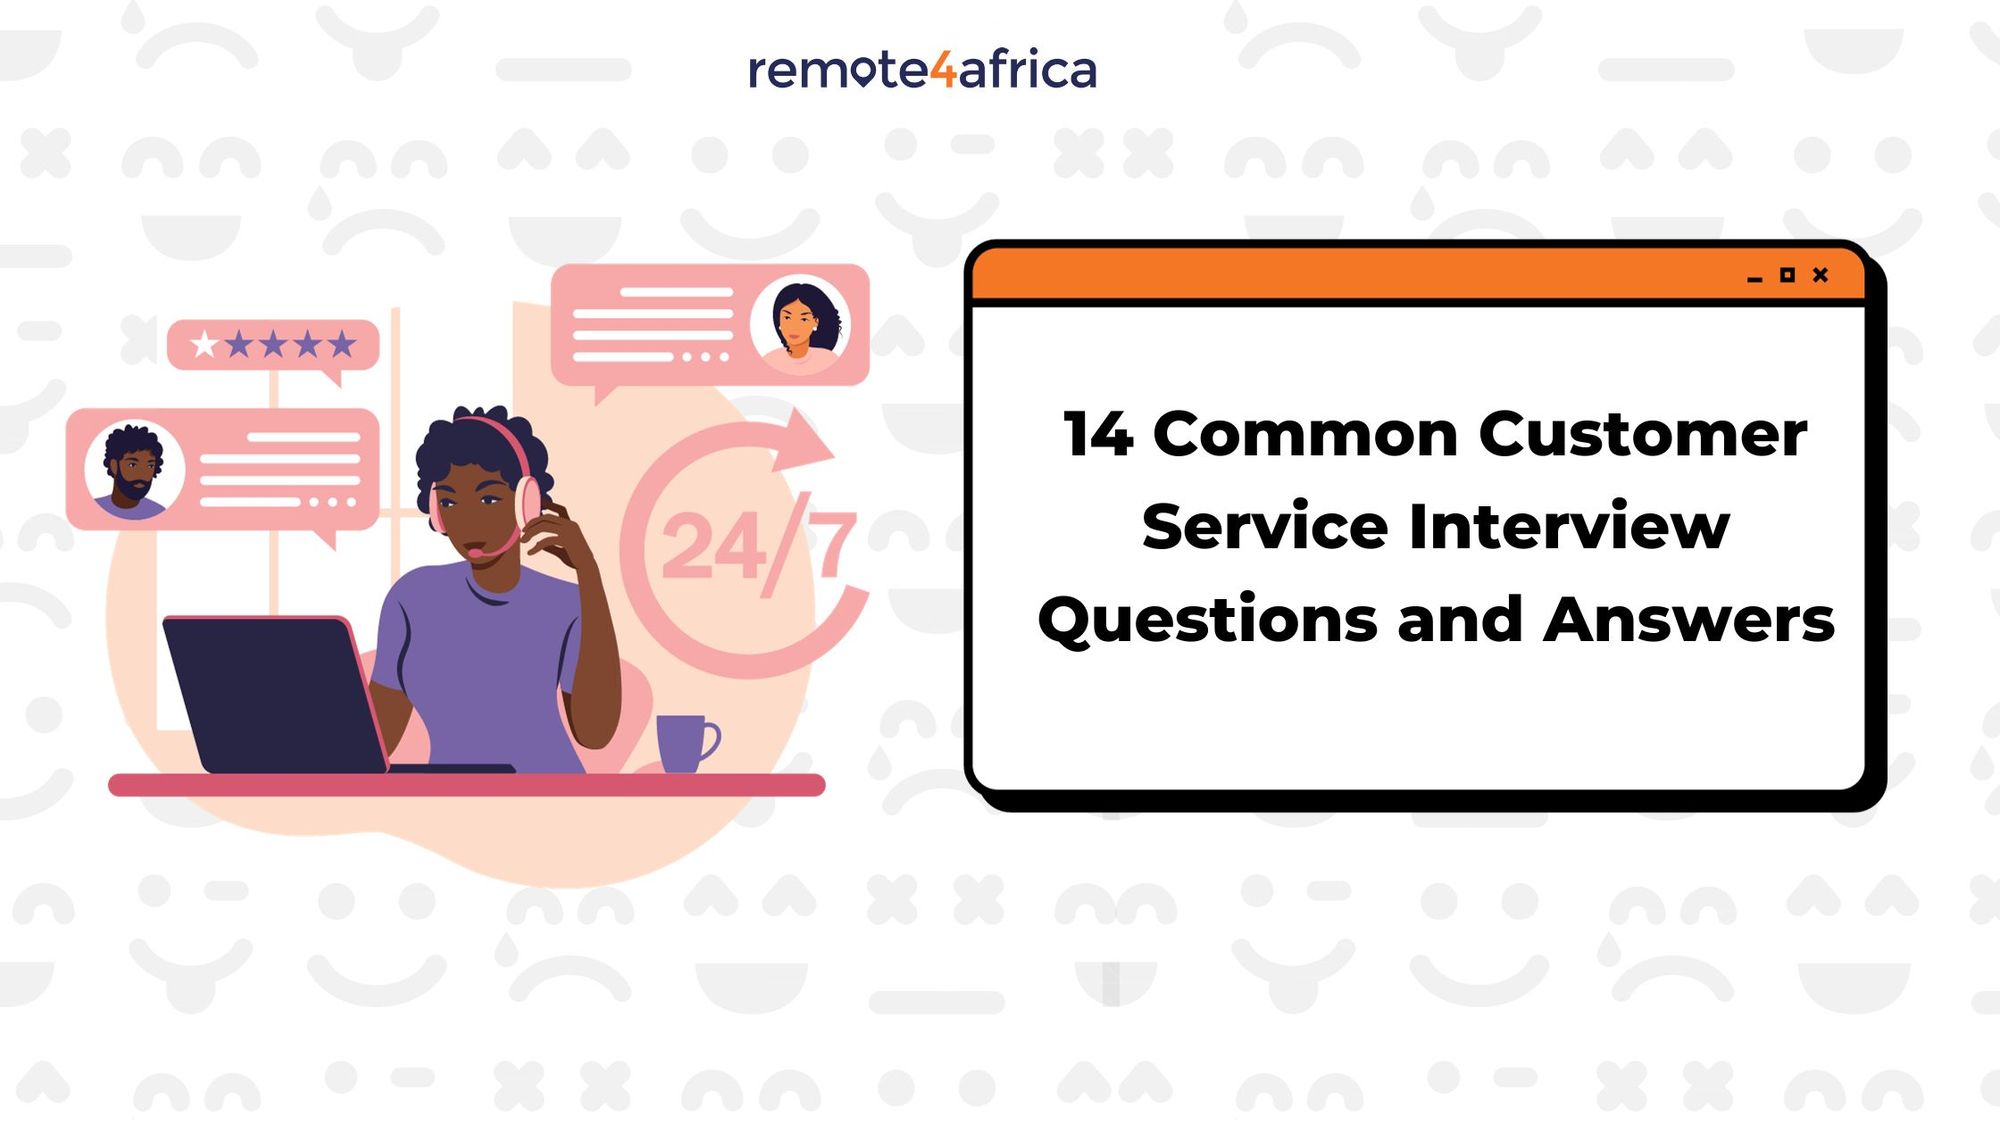 14 Common Customer Service Interview Questions and Answers